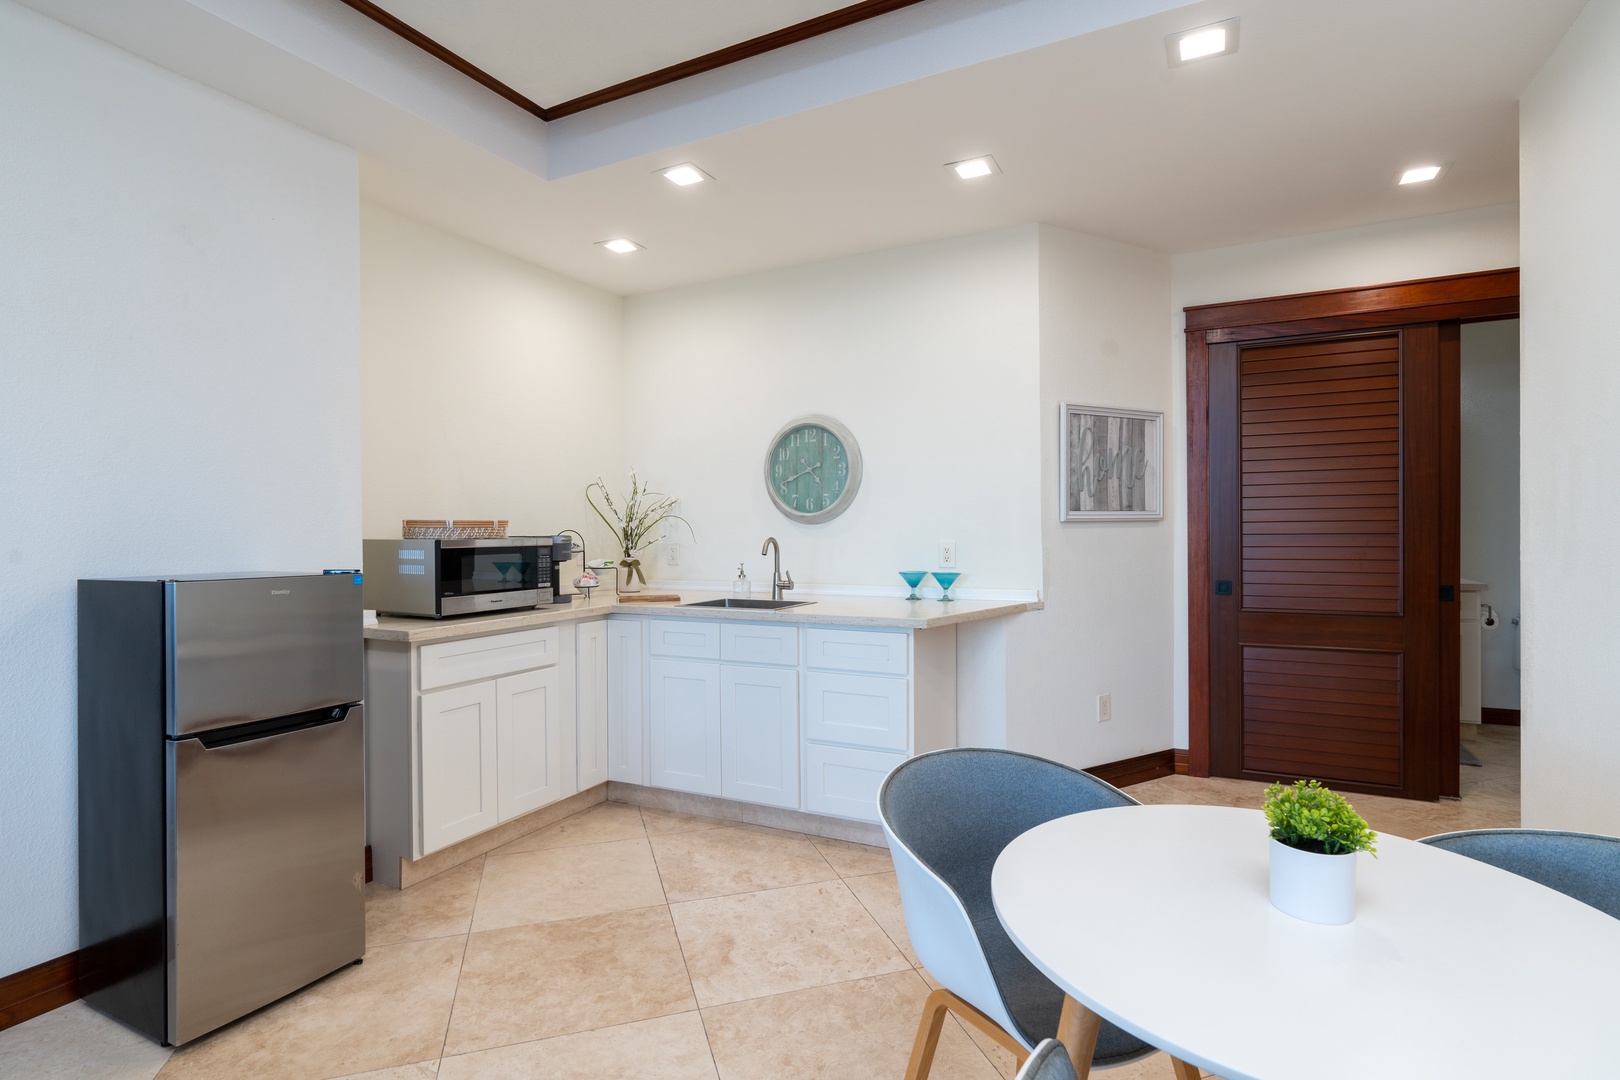 Honolulu Vacation Rentals, Wailupe Seaside - Dining and kitchenette in secondary suite.